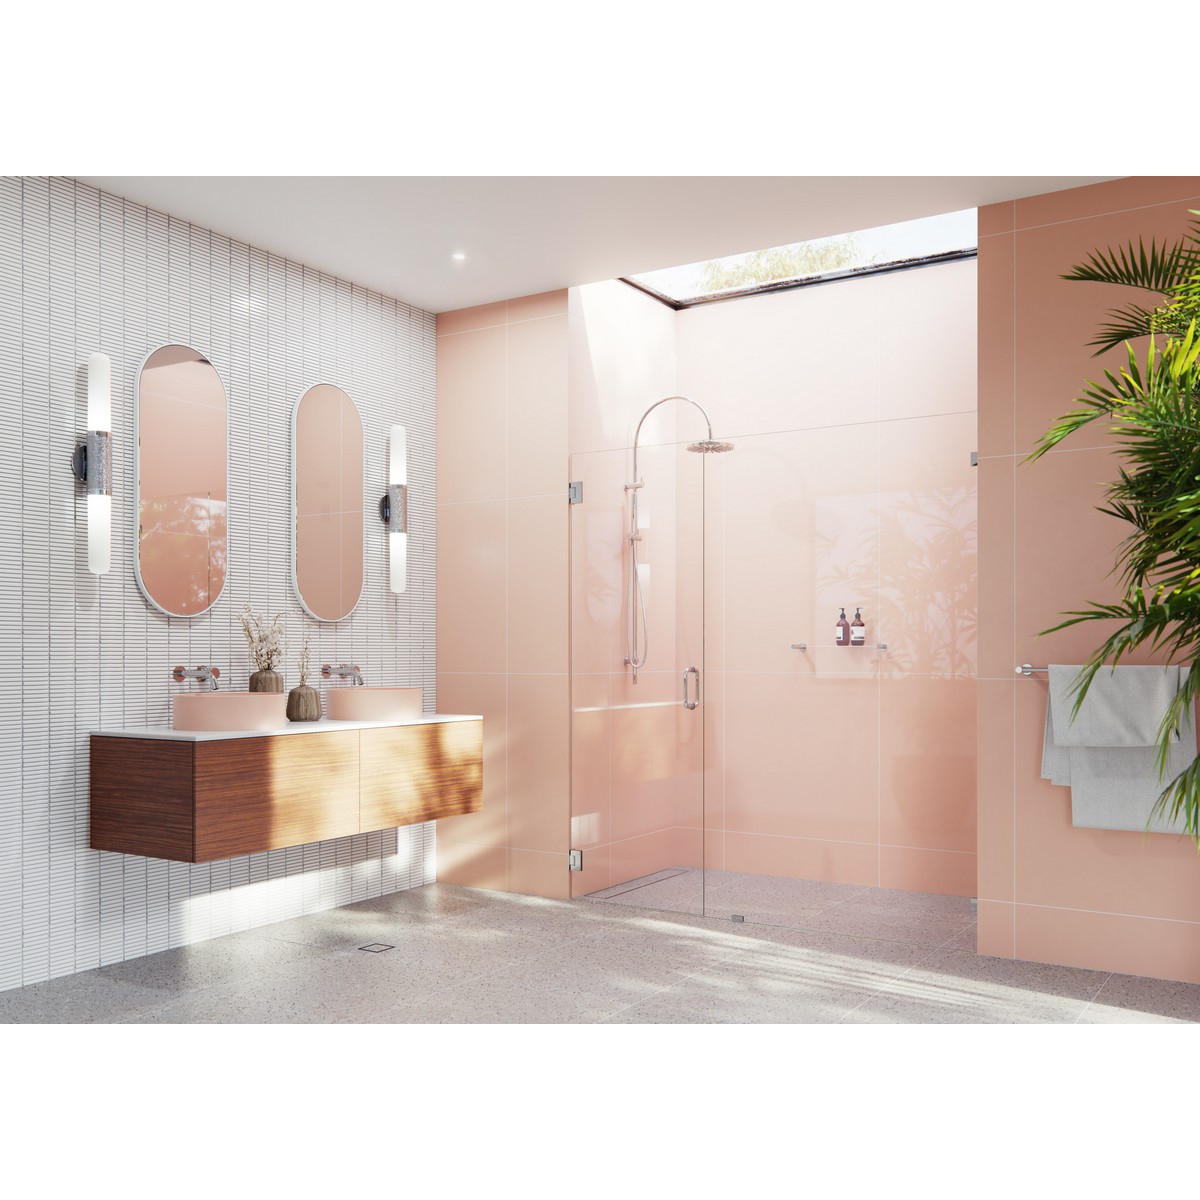 GLASS WAREHOUSE GW-WH-66.25 ILLUME 66 1/4 W X 78 H WALL HINGED FULLY FRAMELESS GLASS SHOWER ENCLOSURE